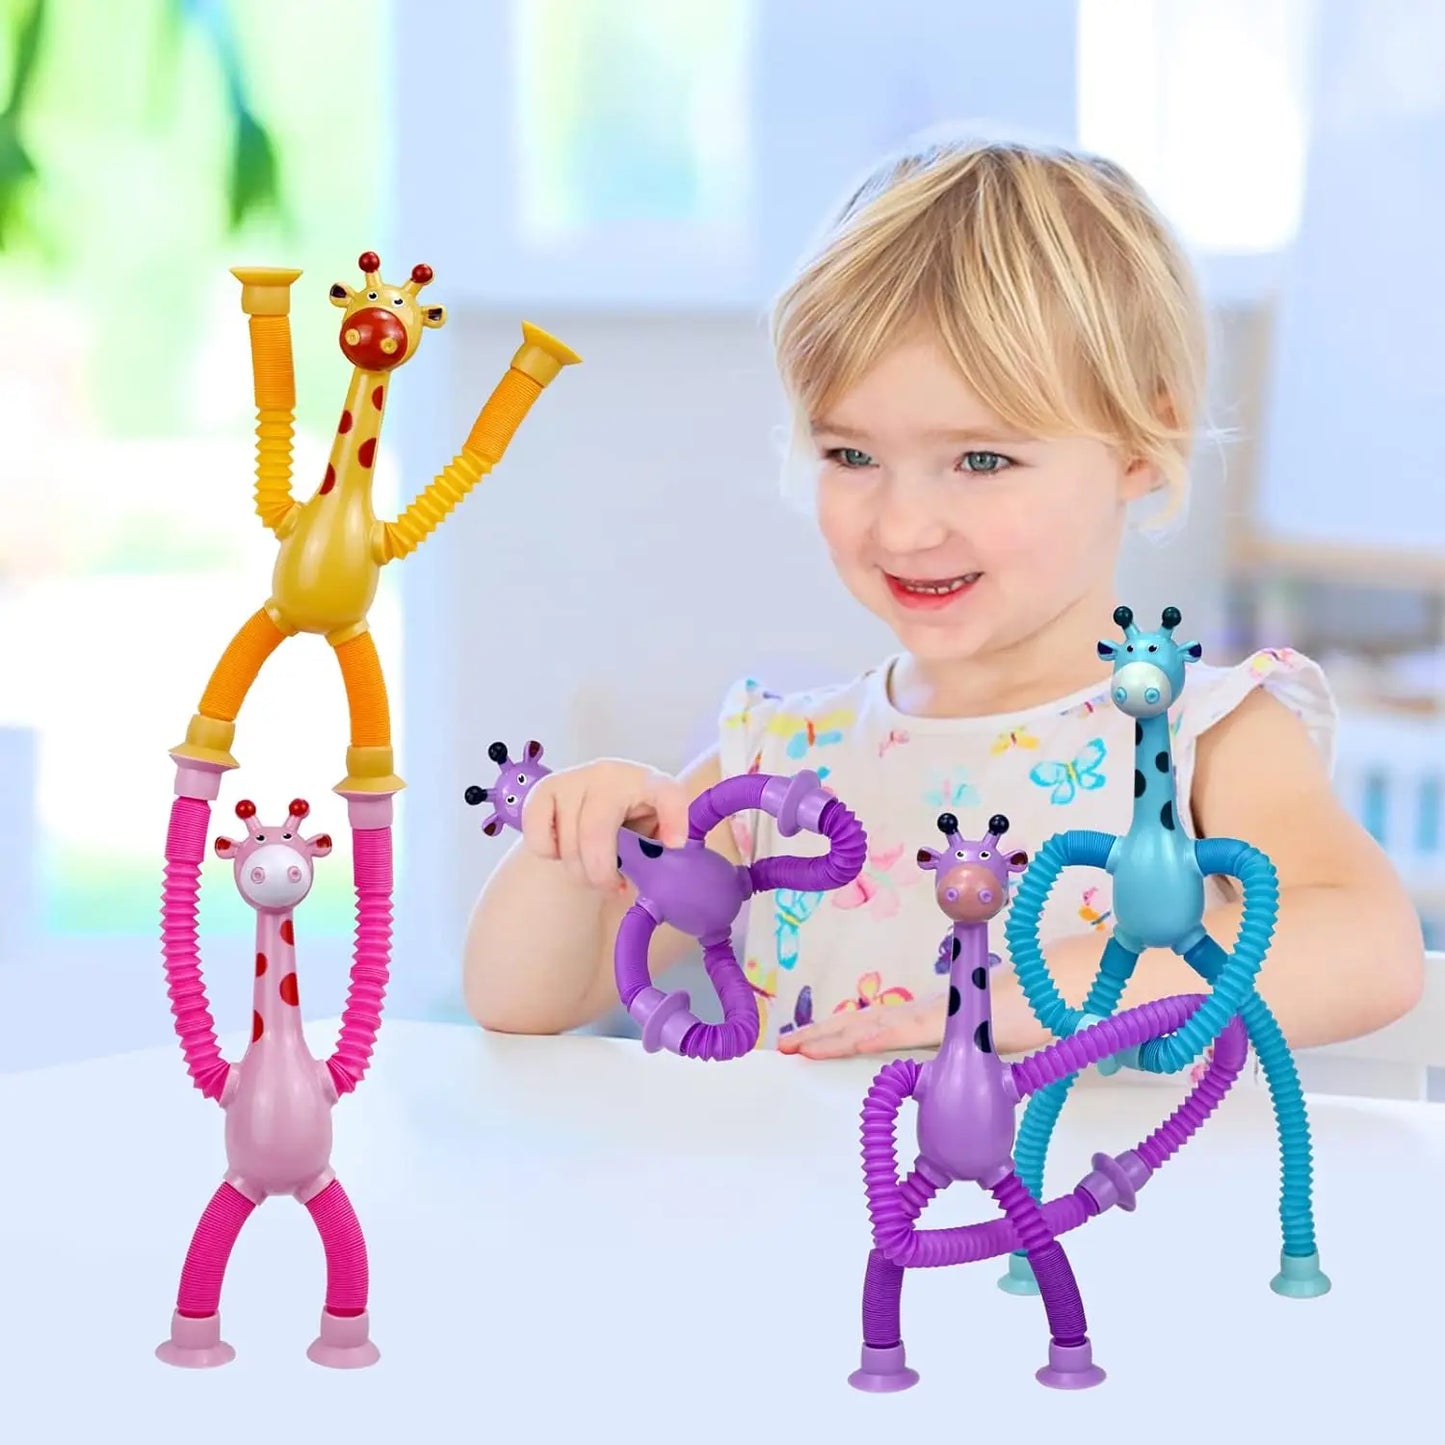 4 Pack Telescopic Suction Cup Giraffe Toy Sensory Tubes for Boys Girls